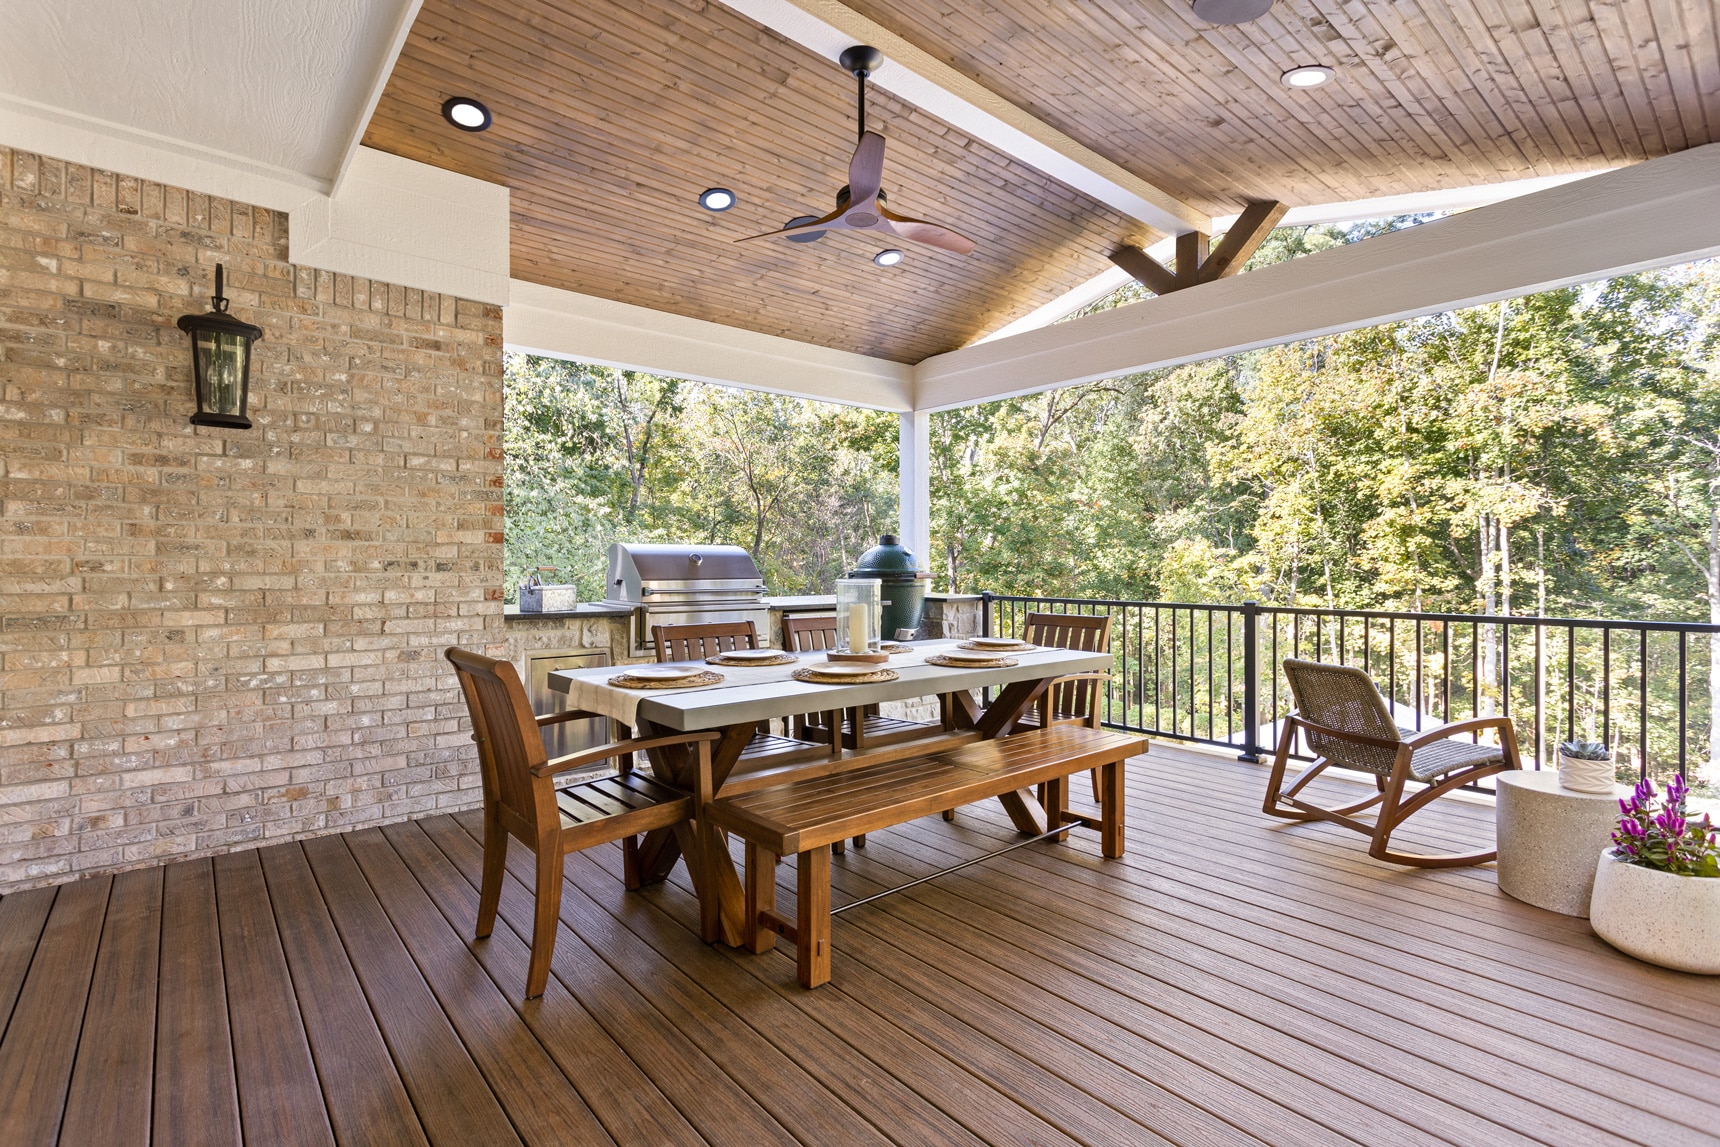 BPI outdoor living space with wooden patio, grill, and dinner table